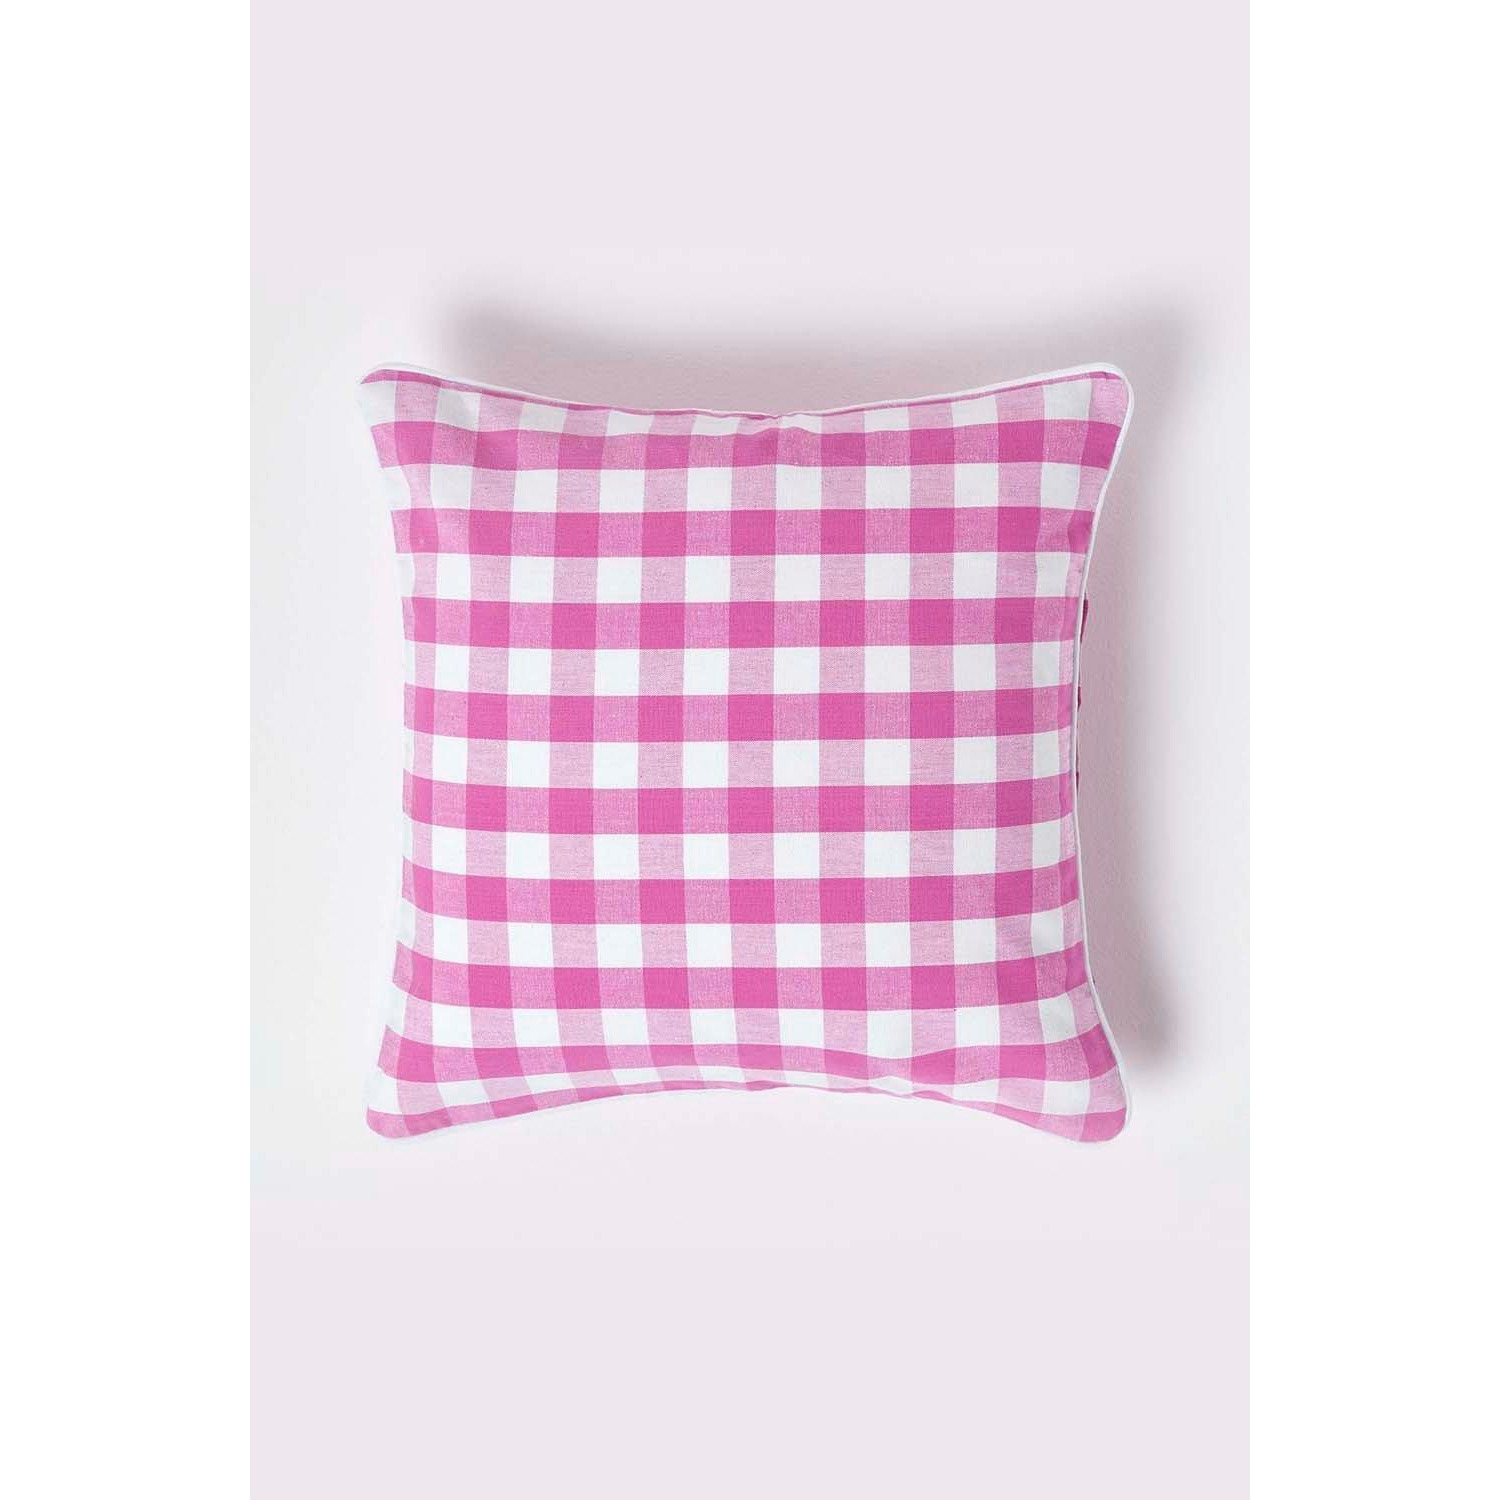 Block Check Cotton Gingham Cushion Cover - image 1